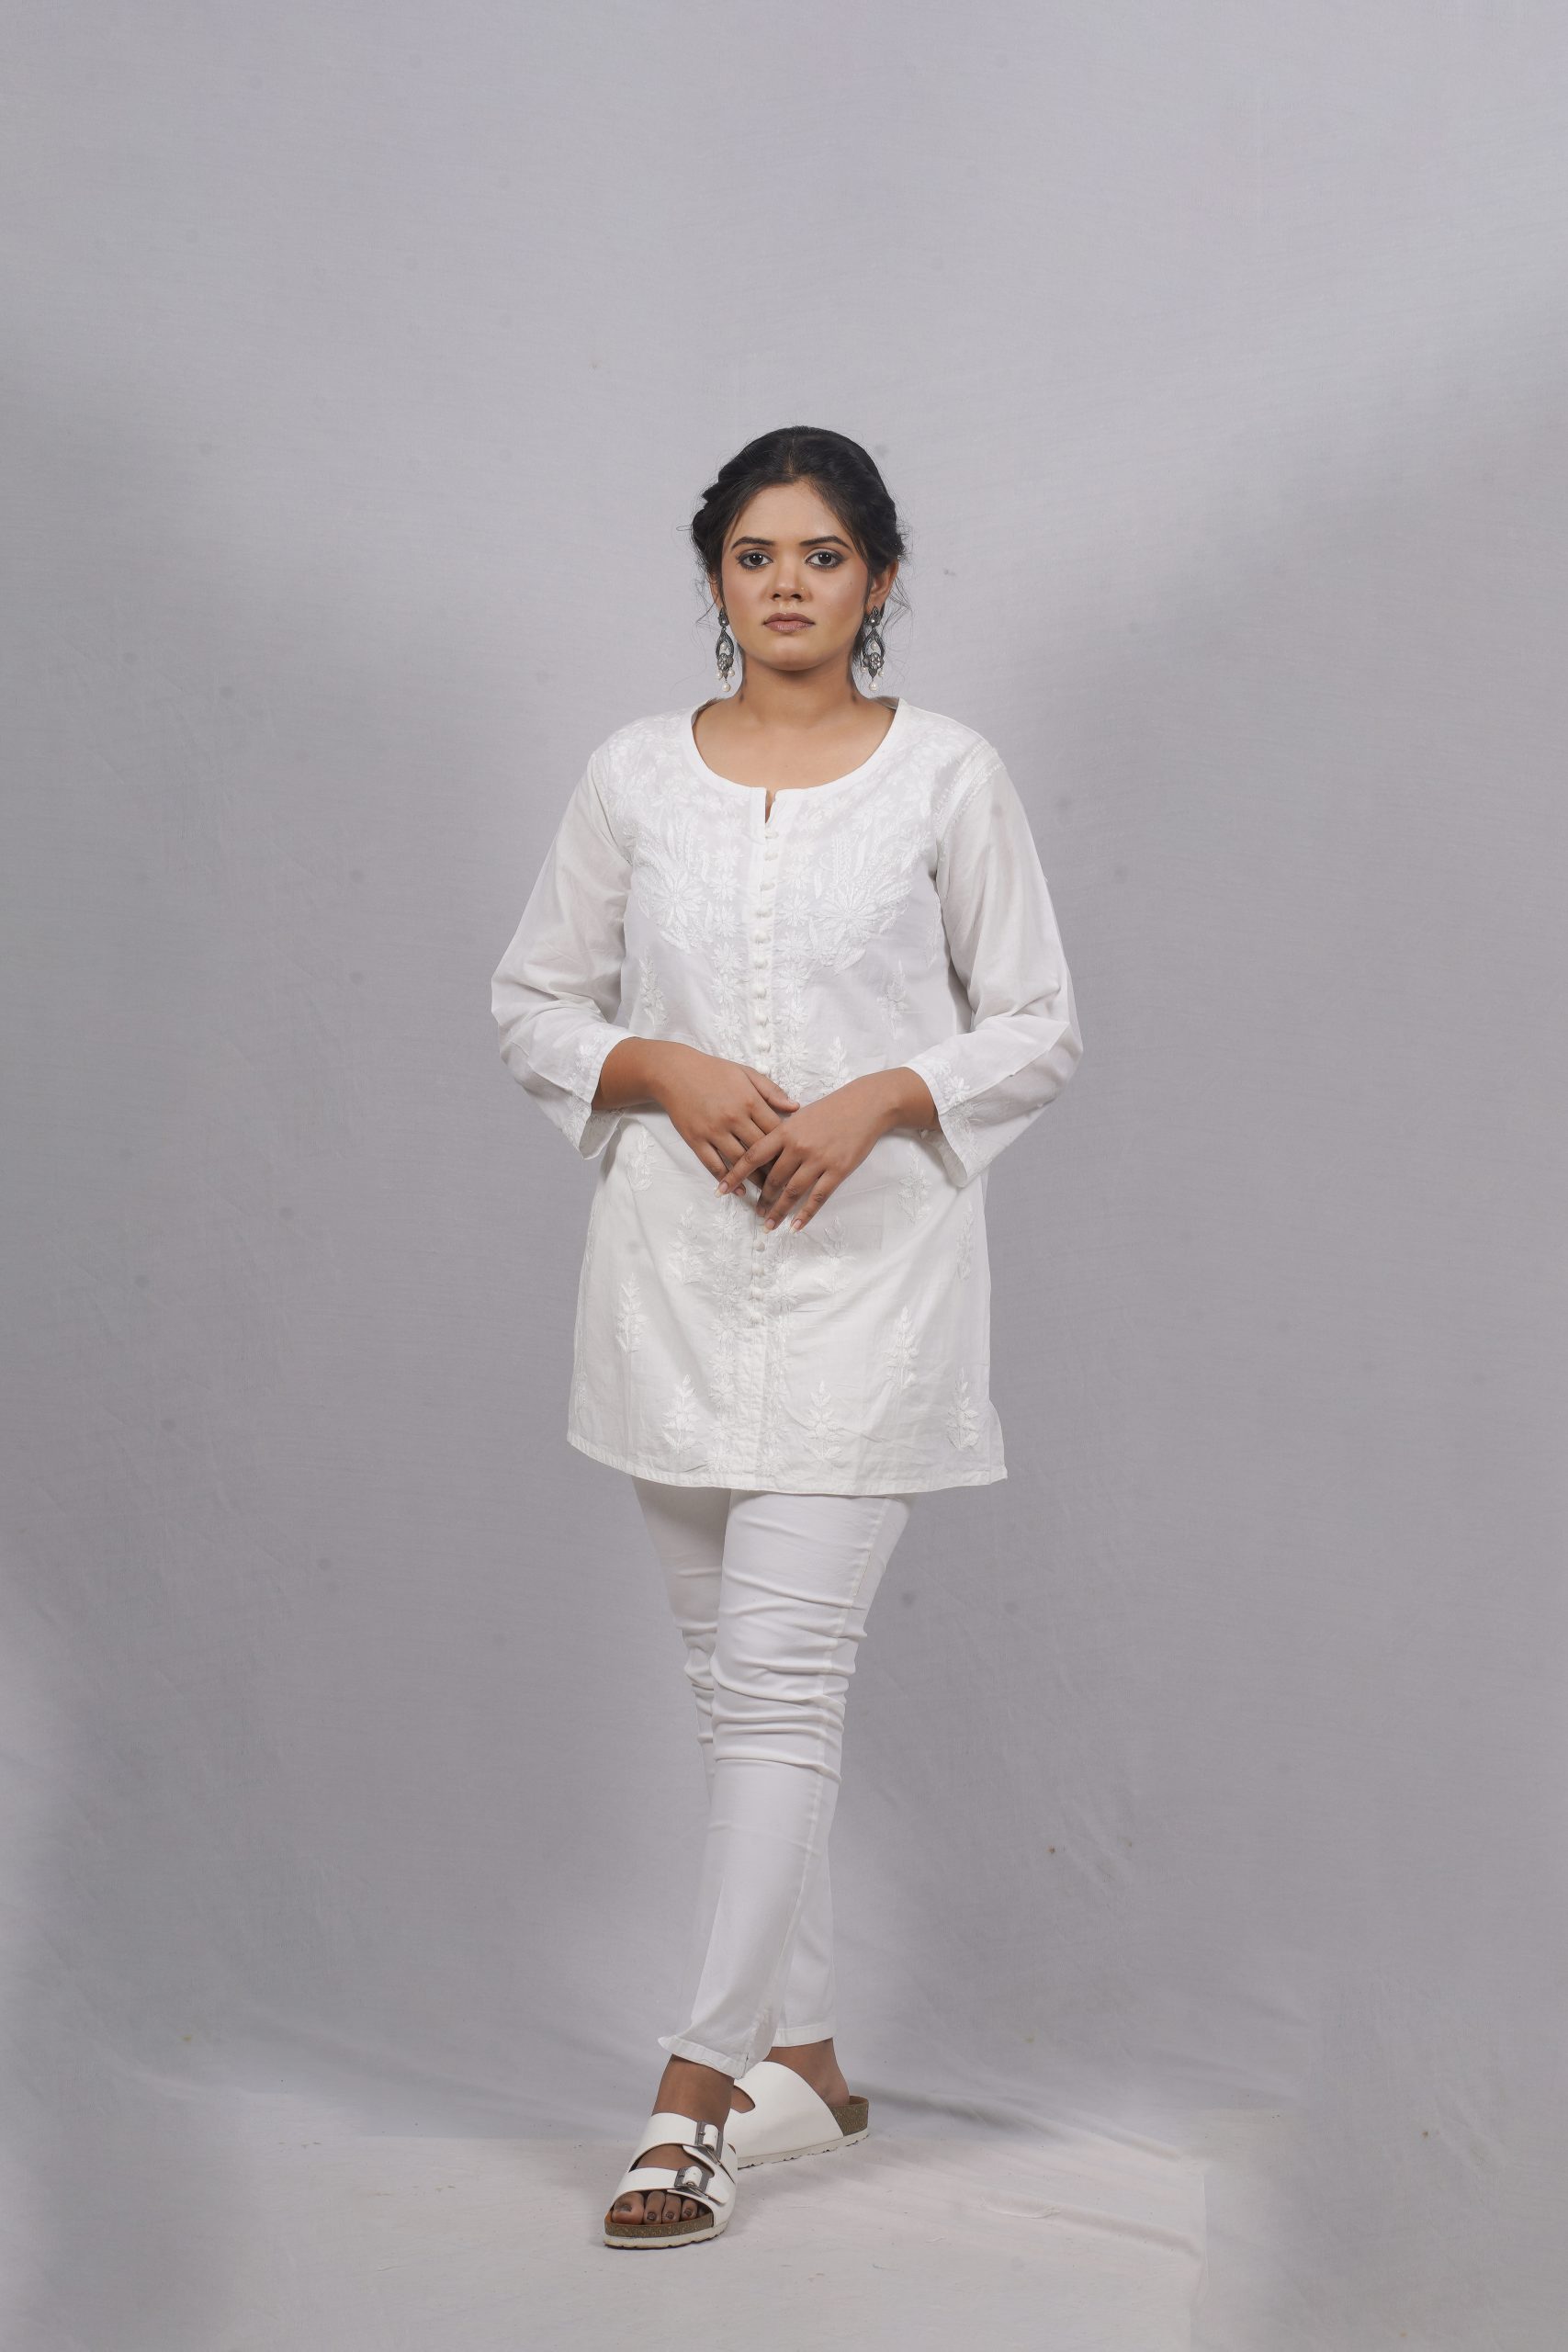 Buy AARTI Group and Company Women's Chikankari Work Kurti and Pant Set  (X-Large, White) at Amazon.in